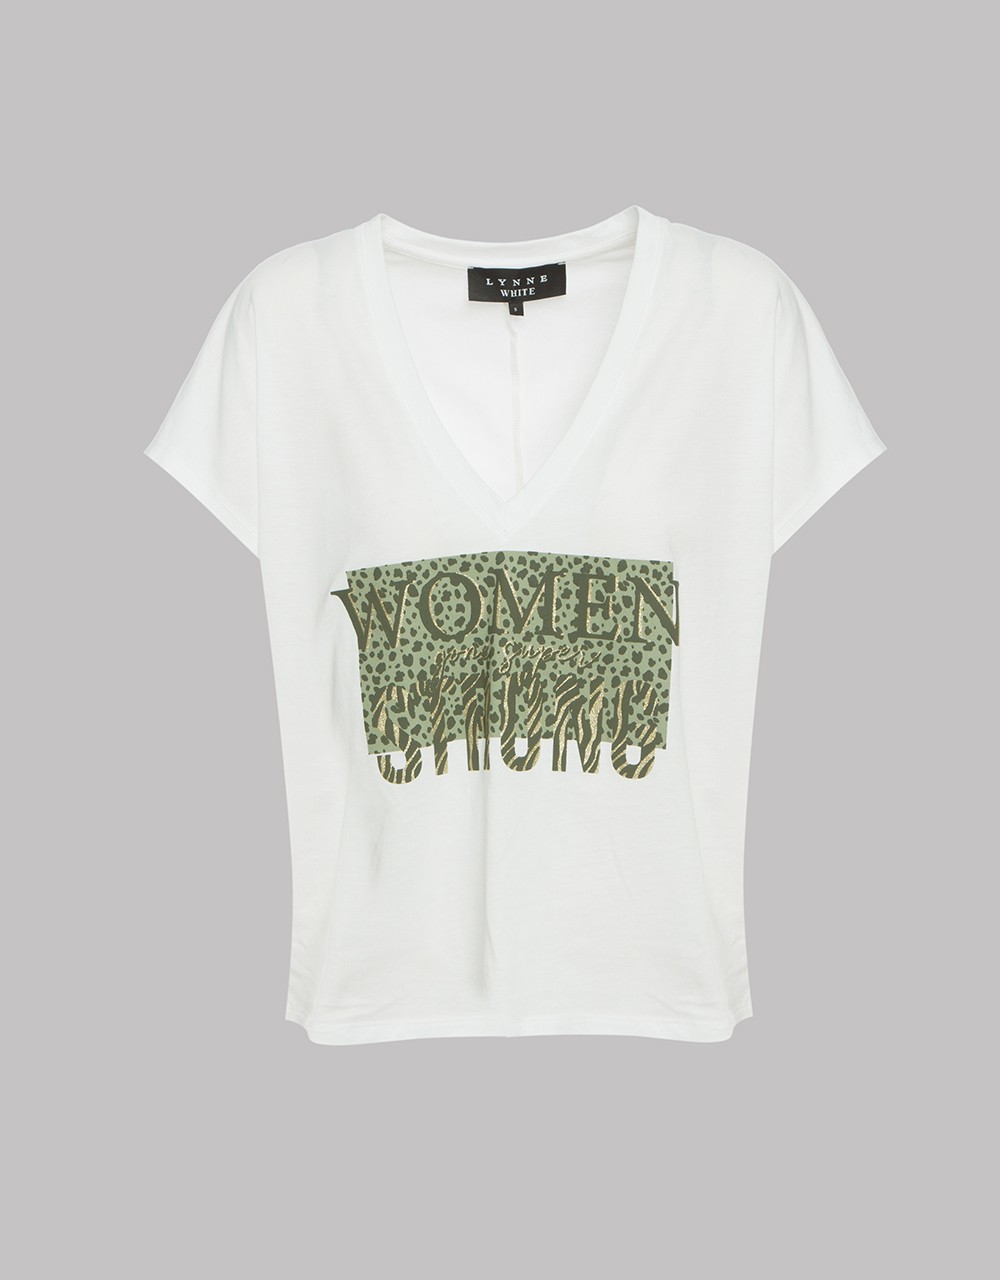 Short sleeve blouse with print "WOMEN gone super STRONG"